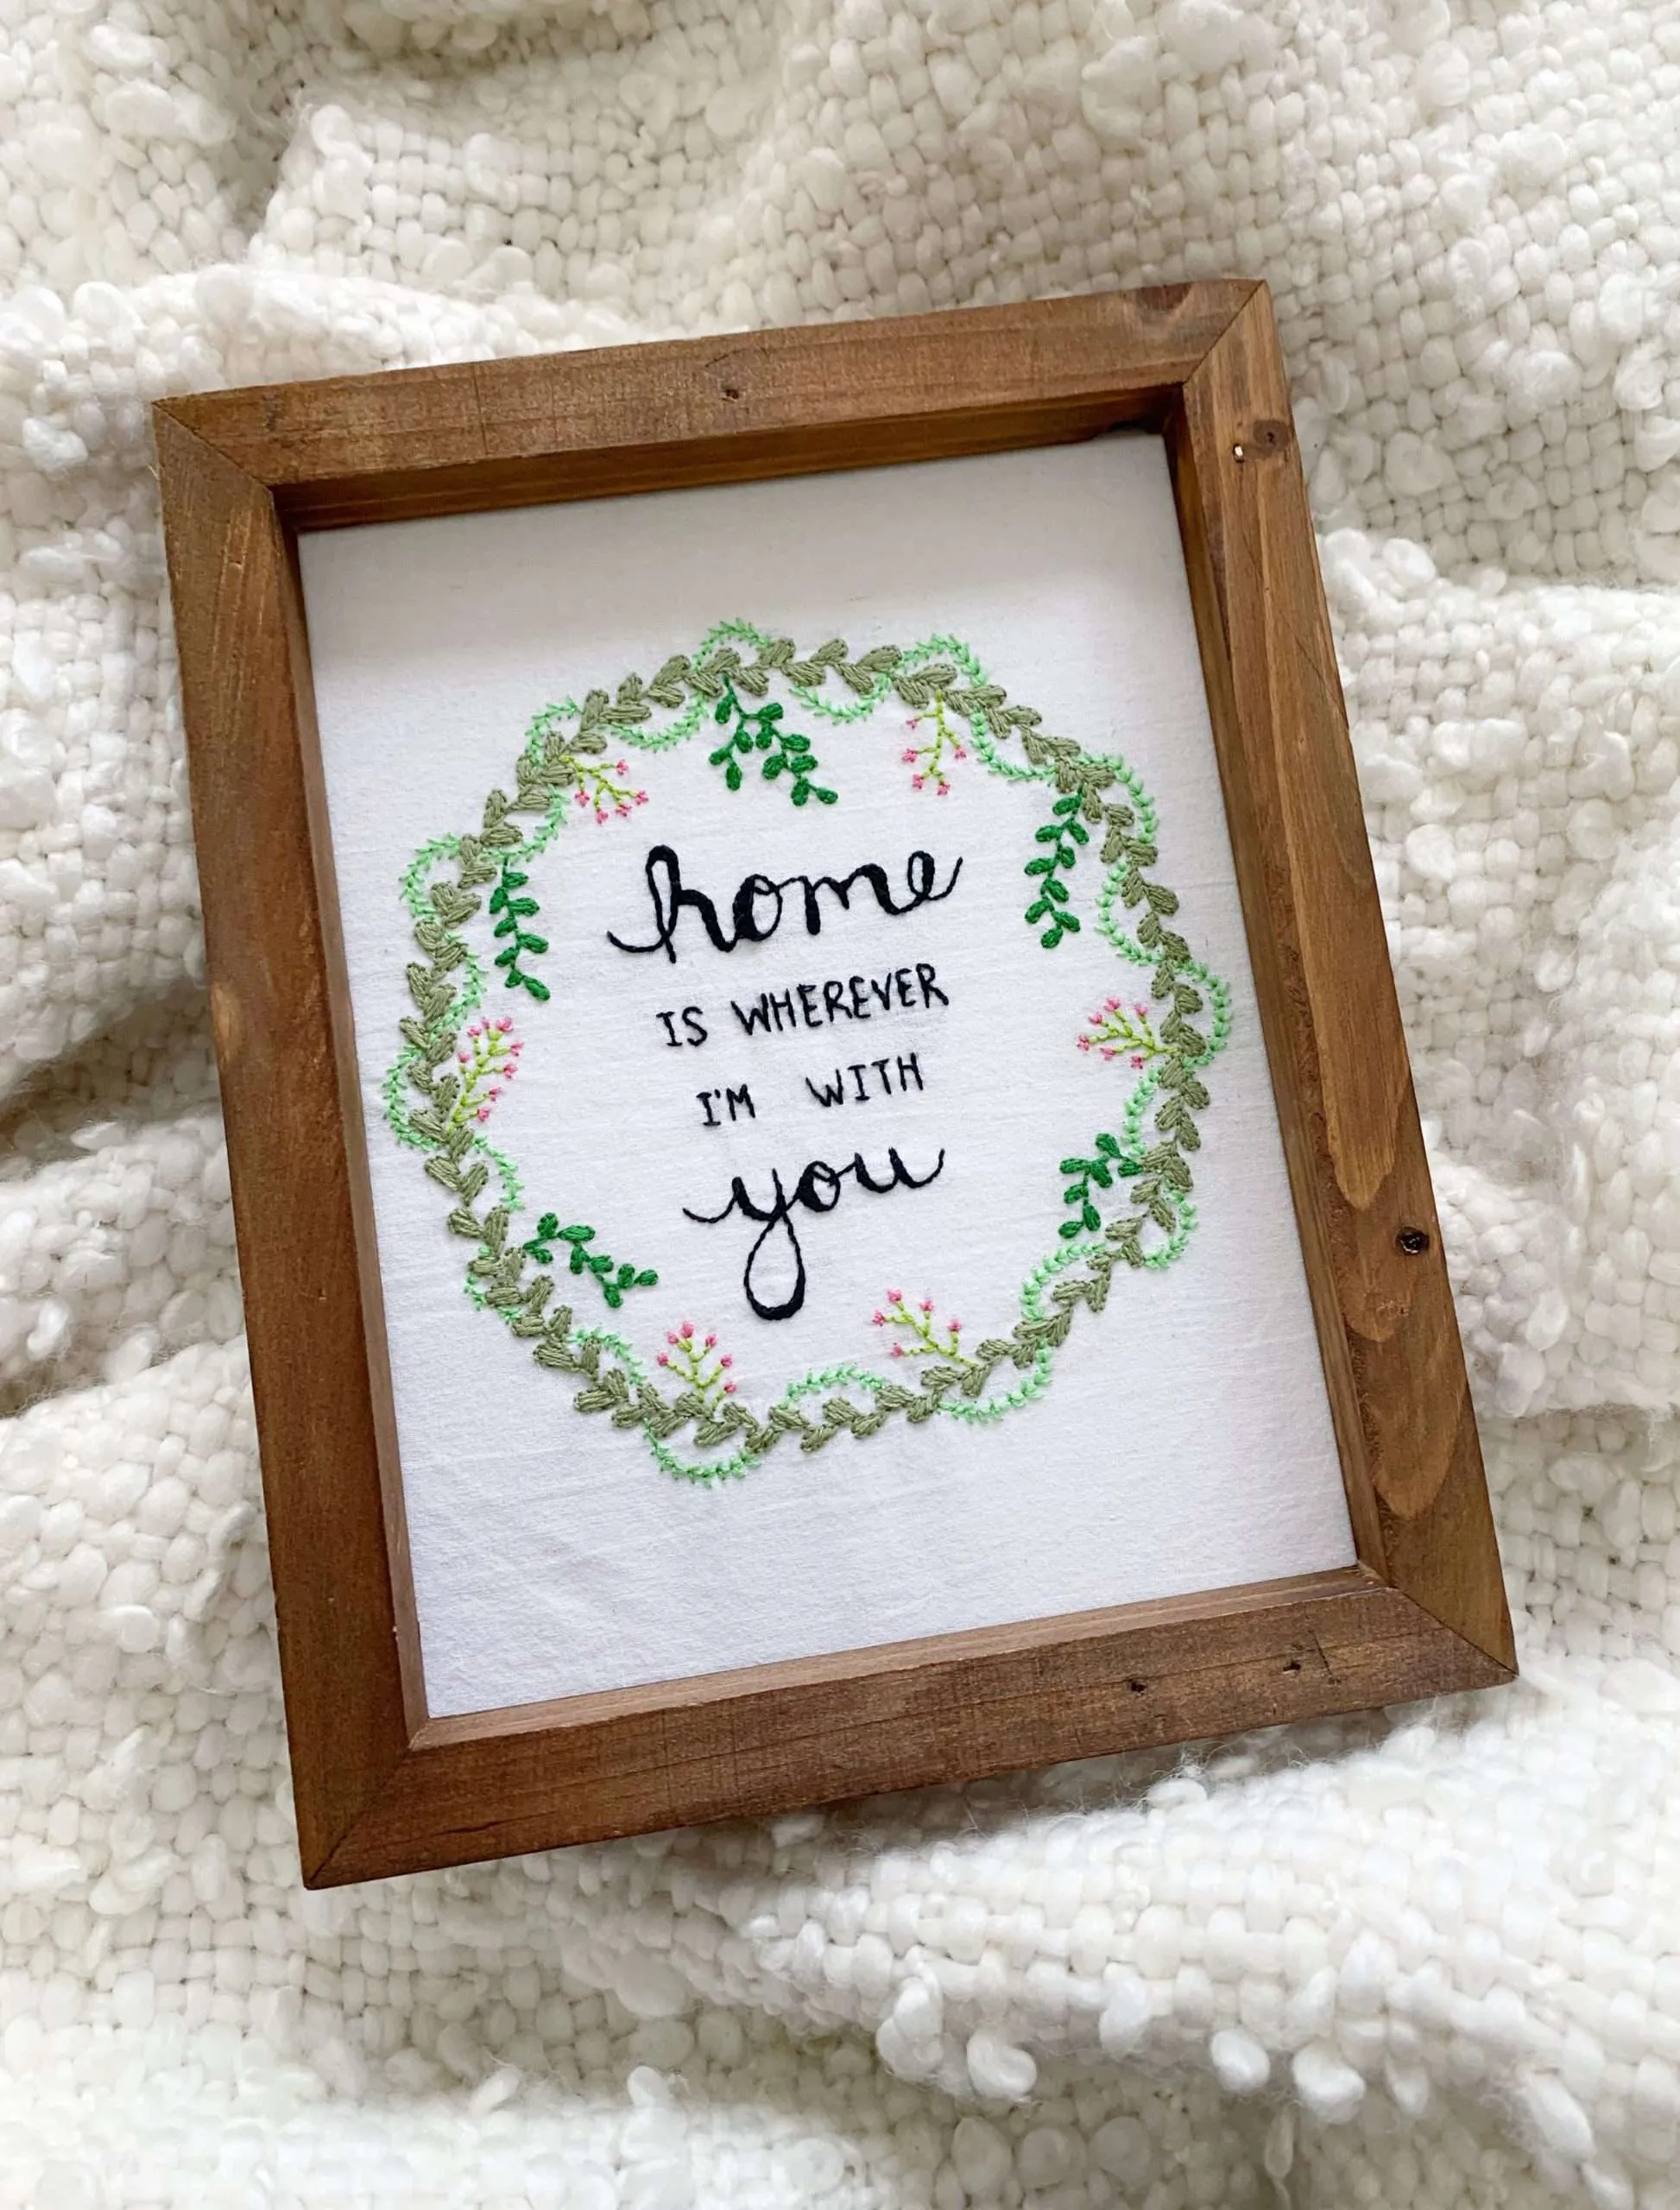 Home is wherever I'm with you embroidery.